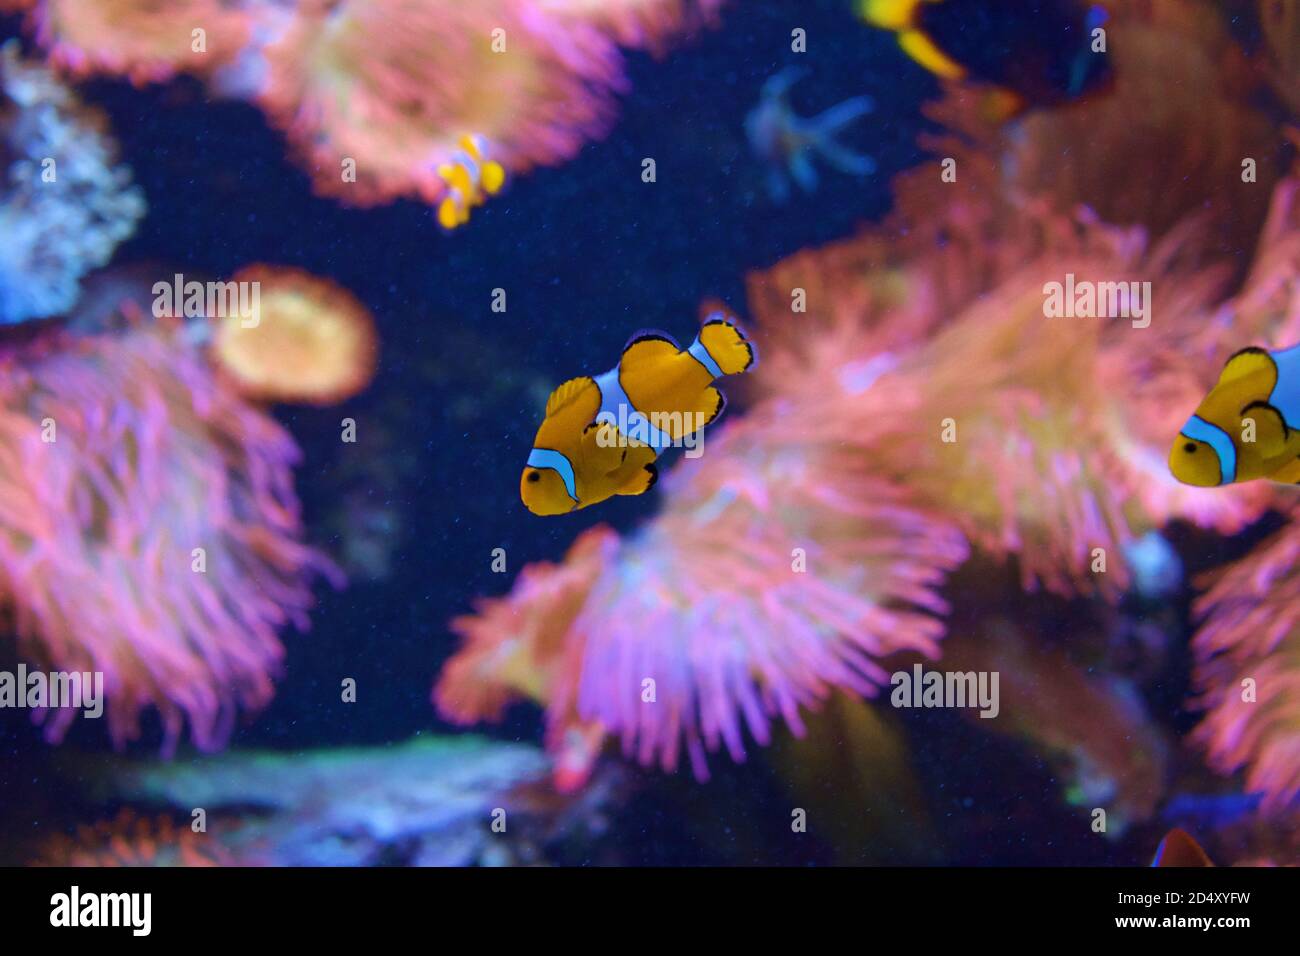 Large aquarium saltwater tank with bright vibrant colors, Clown Fish, and other corral fish. Stock Photo